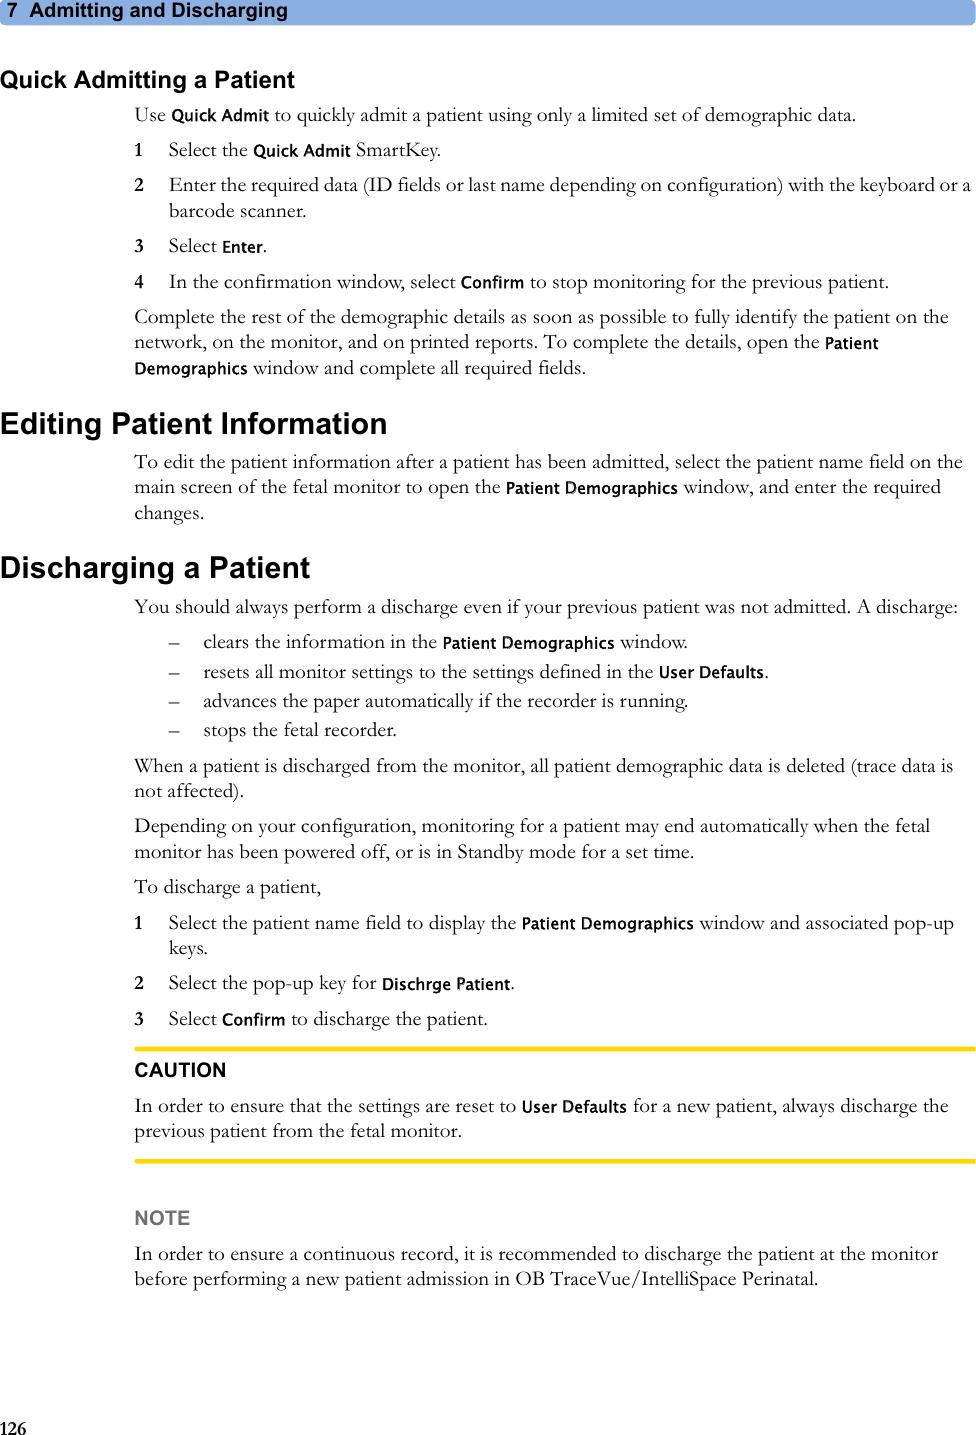 7  Admitting and Discharging126Quick Admitting a PatientUse Quick Admit to quickly admit a patient using only a limited set of demographic data.1Select the Quick Admit SmartKey.2Enter the required data (ID fields or last name depending on configuration) with the keyboard or a barcode scanner.3Select Enter.4In the confirmation window, select Confirm to stop monitoring for the previous patient.Complete the rest of the demographic details as soon as possible to fully identify the patient on the network, on the monitor, and on printed reports. To complete the details, open the Patient Demographics window and complete all required fields.Editing Patient InformationTo edit the patient information after a patient has been admitted, select the patient name field on the main screen of the fetal monitor to open the Patient Demographics window, and enter the required changes.Discharging a PatientYou should always perform a discharge even if your previous patient was not admitted. A discharge:– clears the information in the Patient Demographics window.– resets all monitor settings to the settings defined in the User Defaults.– advances the paper automatically if the recorder is running.– stops the fetal recorder.When a patient is discharged from the monitor, all patient demographic data is deleted (trace data is not affected).Depending on your configuration, monitoring for a patient may end automatically when the fetal monitor has been powered off, or is in Standby mode for a set time.To discharge a patient,1Select the patient name field to display the Patient Demographics window and associated pop-up keys.2Select the pop-up key for Dischrge Patient.3Select Confirm to discharge the patient.CAUTIONIn order to ensure that the settings are reset to User Defaults for a new patient, always discharge the previous patient from the fetal monitor.NOTEIn order to ensure a continuous record, it is recommended to discharge the patient at the monitor before performing a new patient admission in OB TraceVue/IntelliSpace Perinatal.